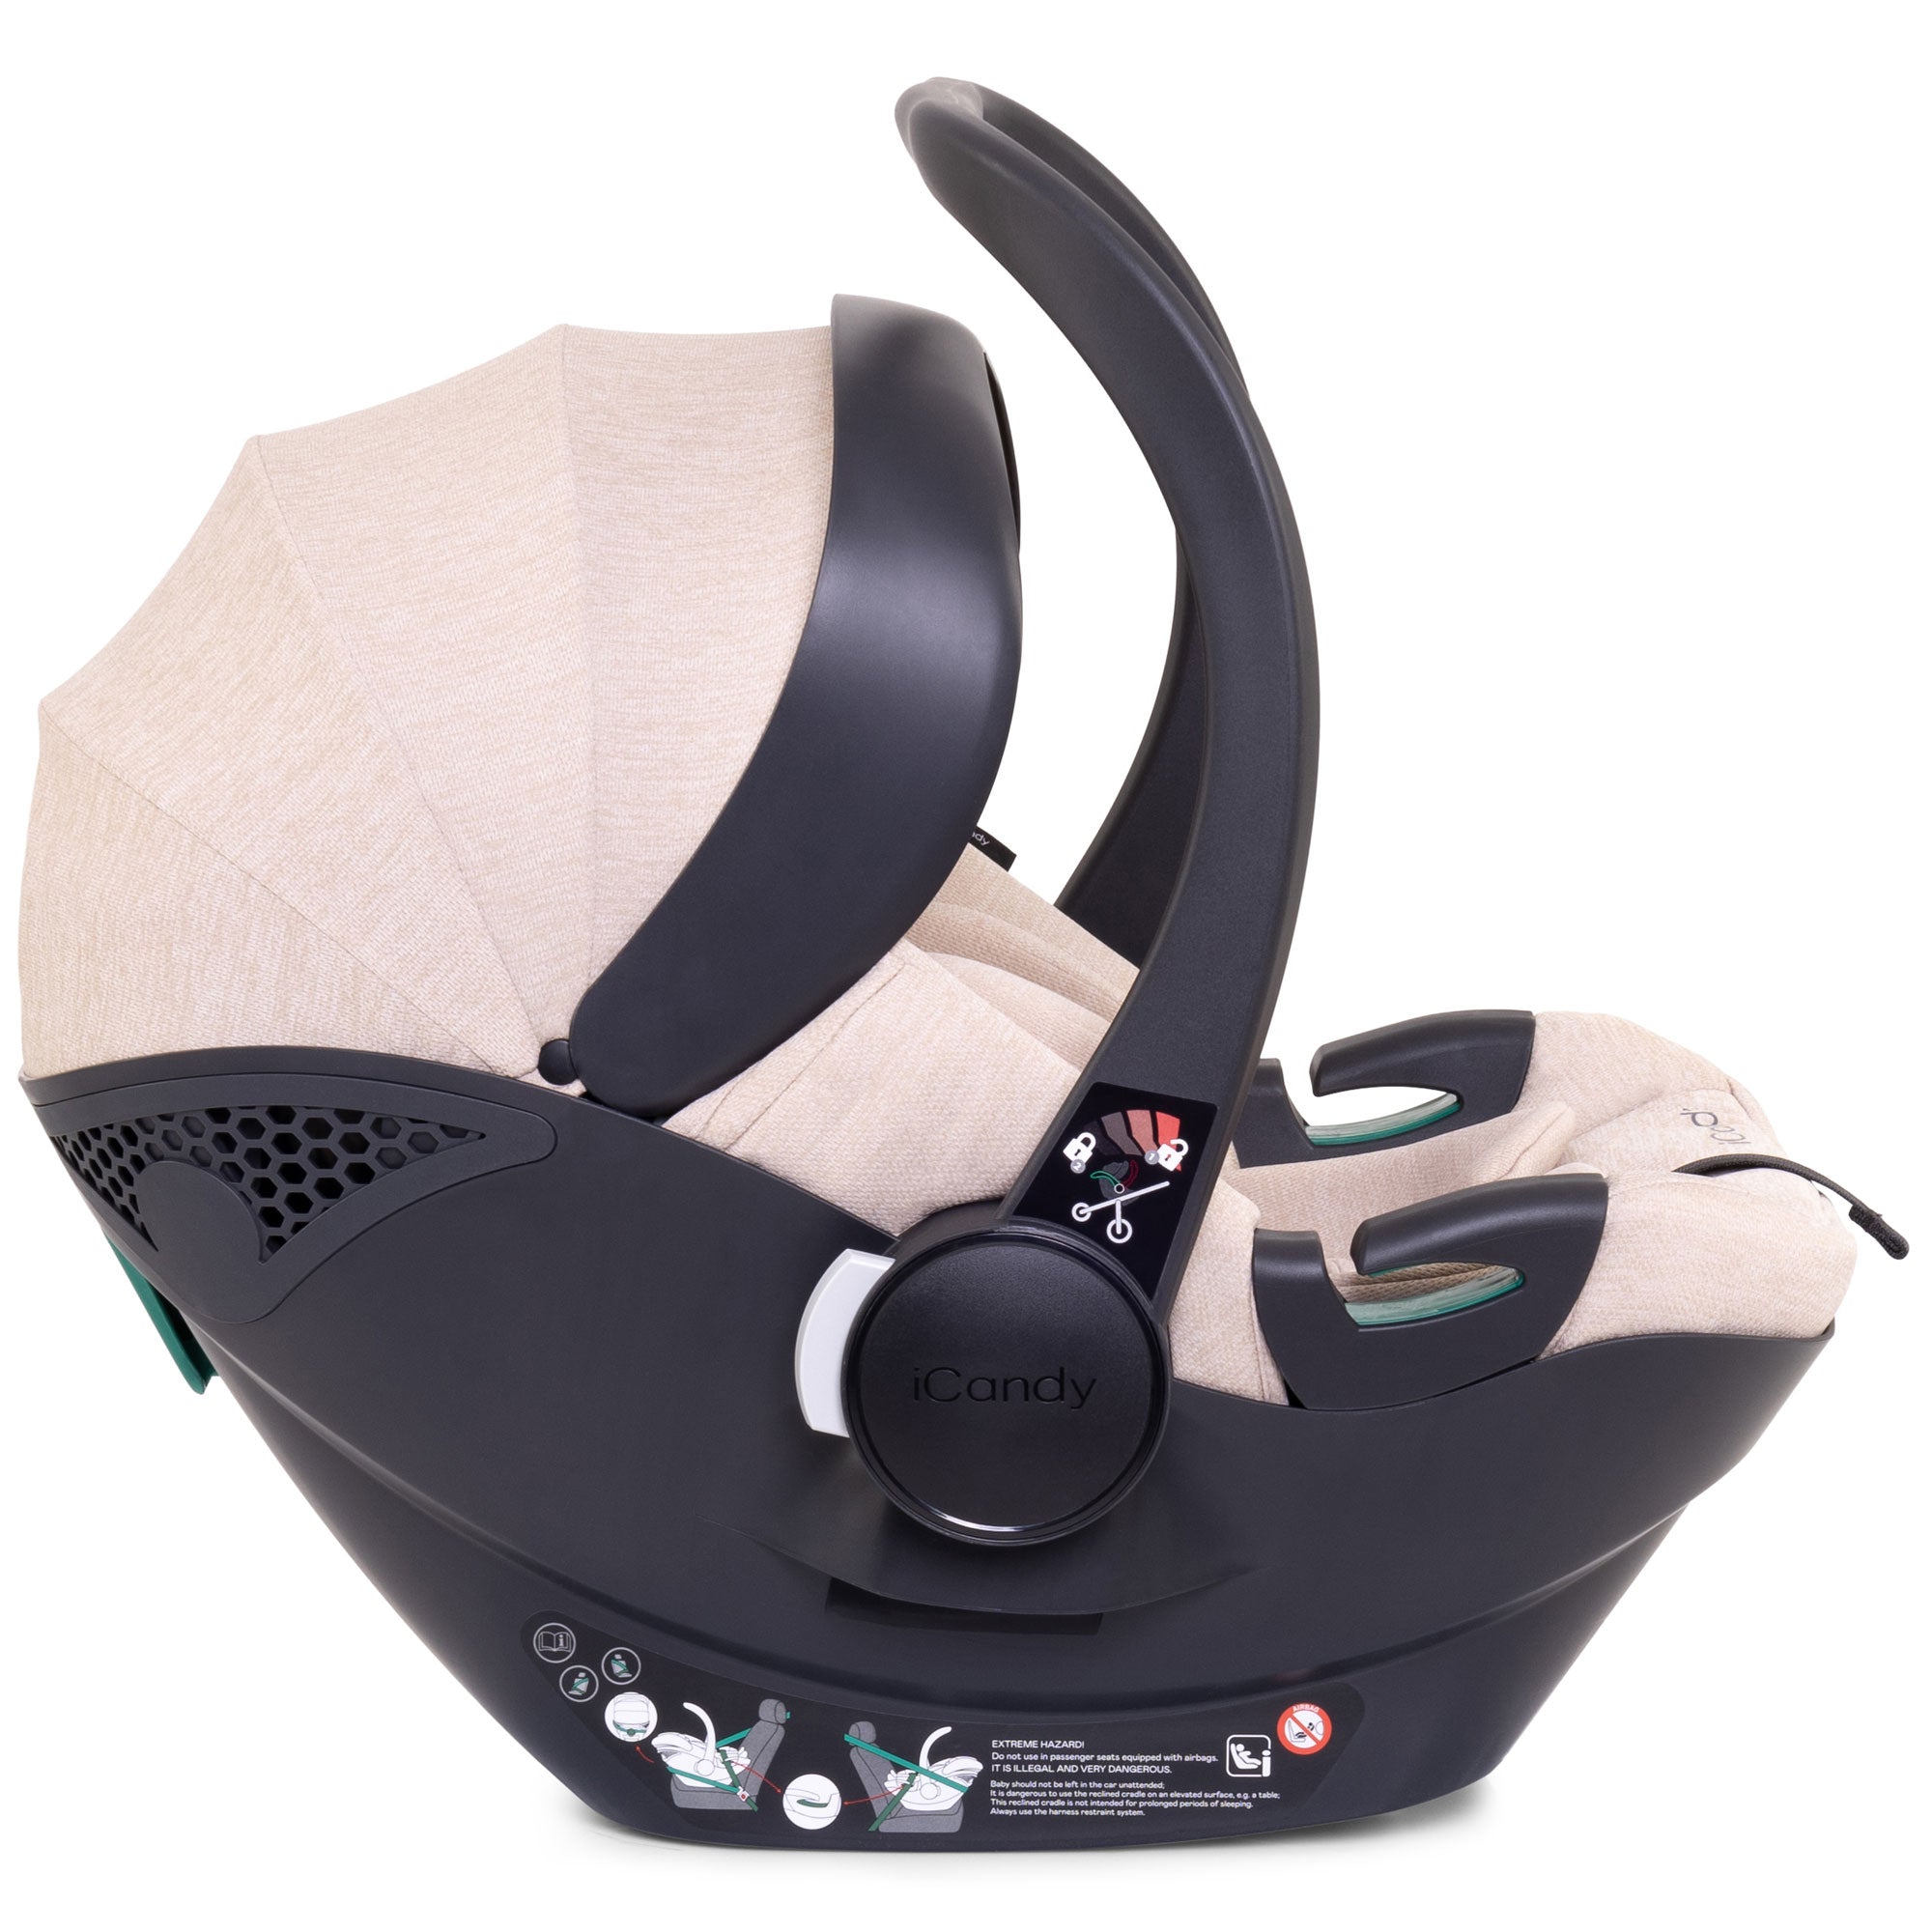 iCandy Peach 7 Complete Bundle with COCOON Car Seat in Biscotti